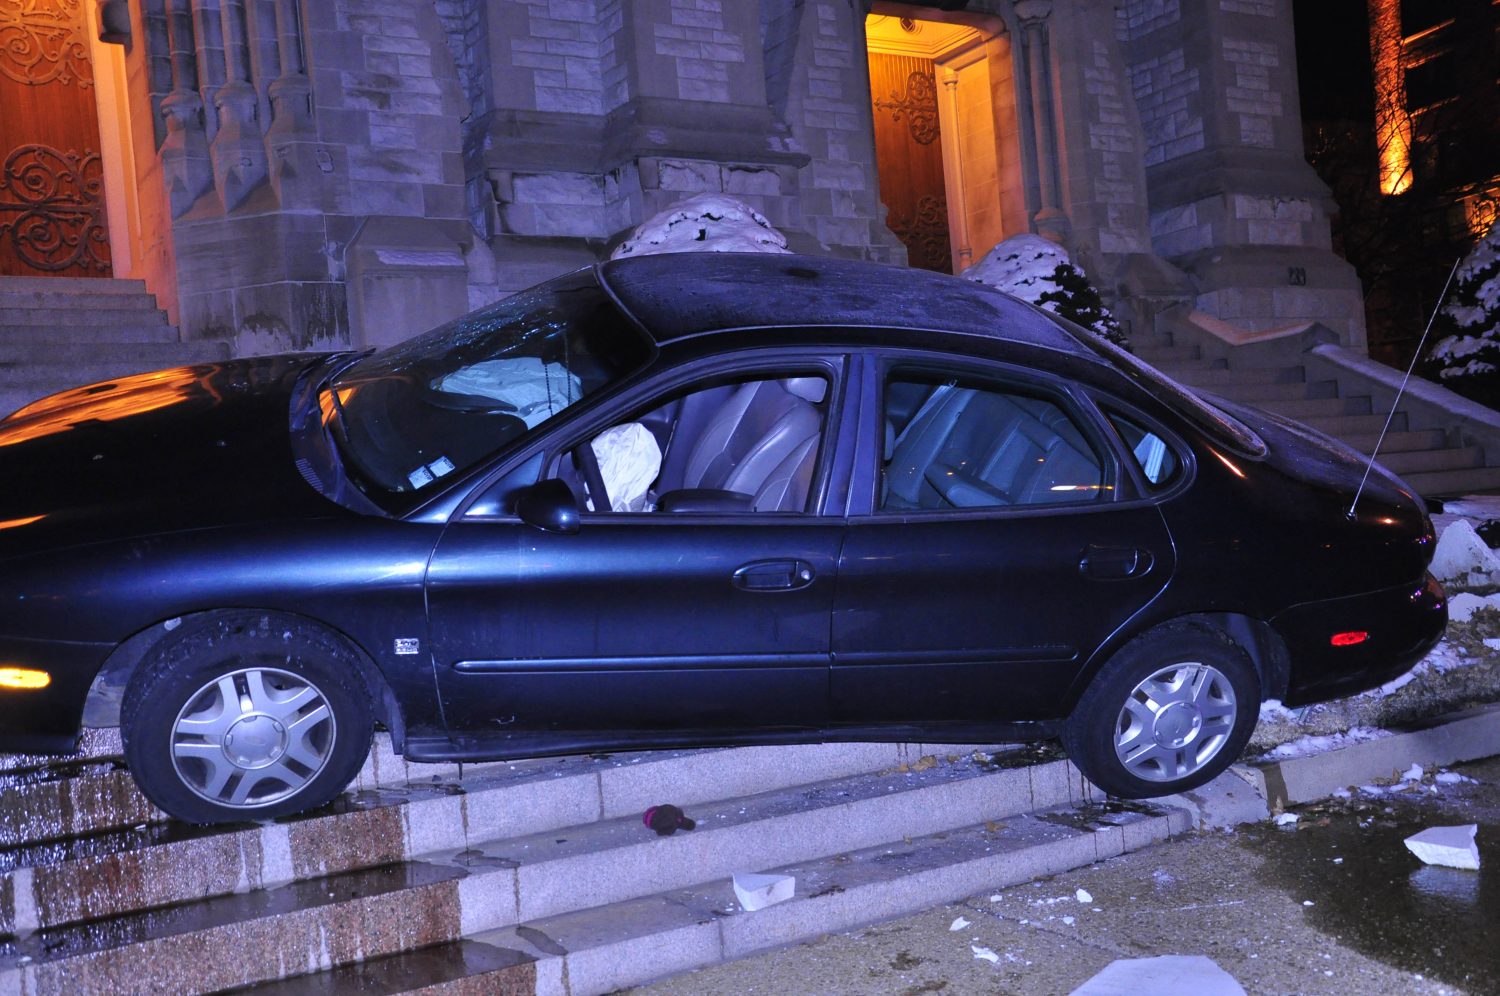 December 27th 2010 - a car crash on the steps of College Church